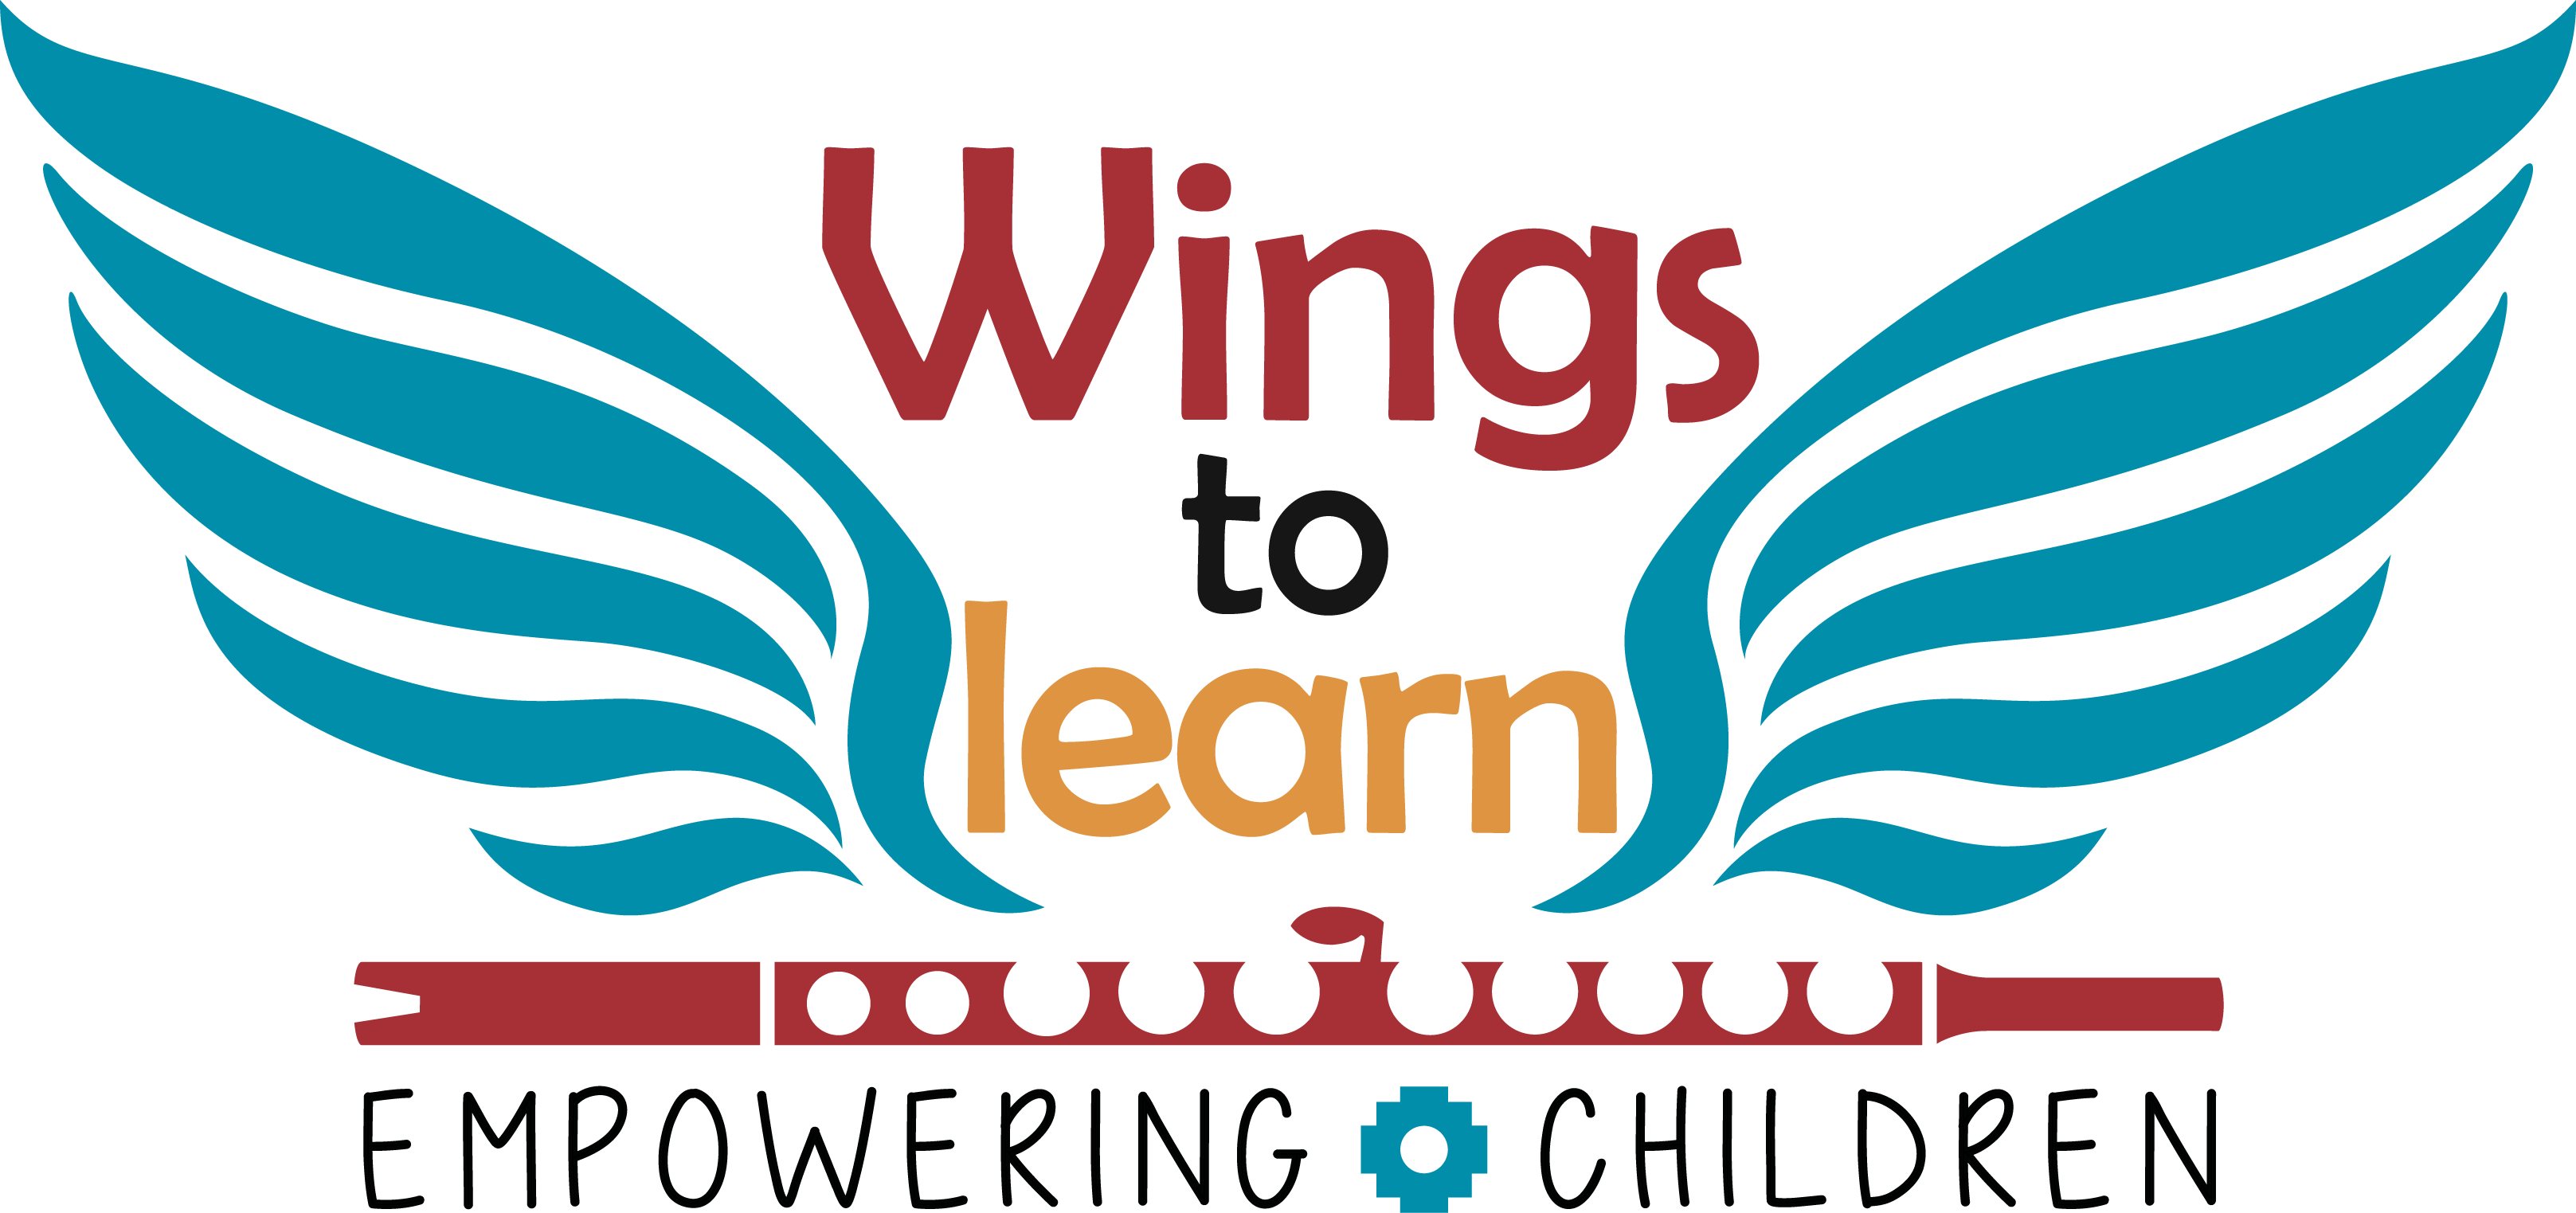 Wings to Learn - Empowering children